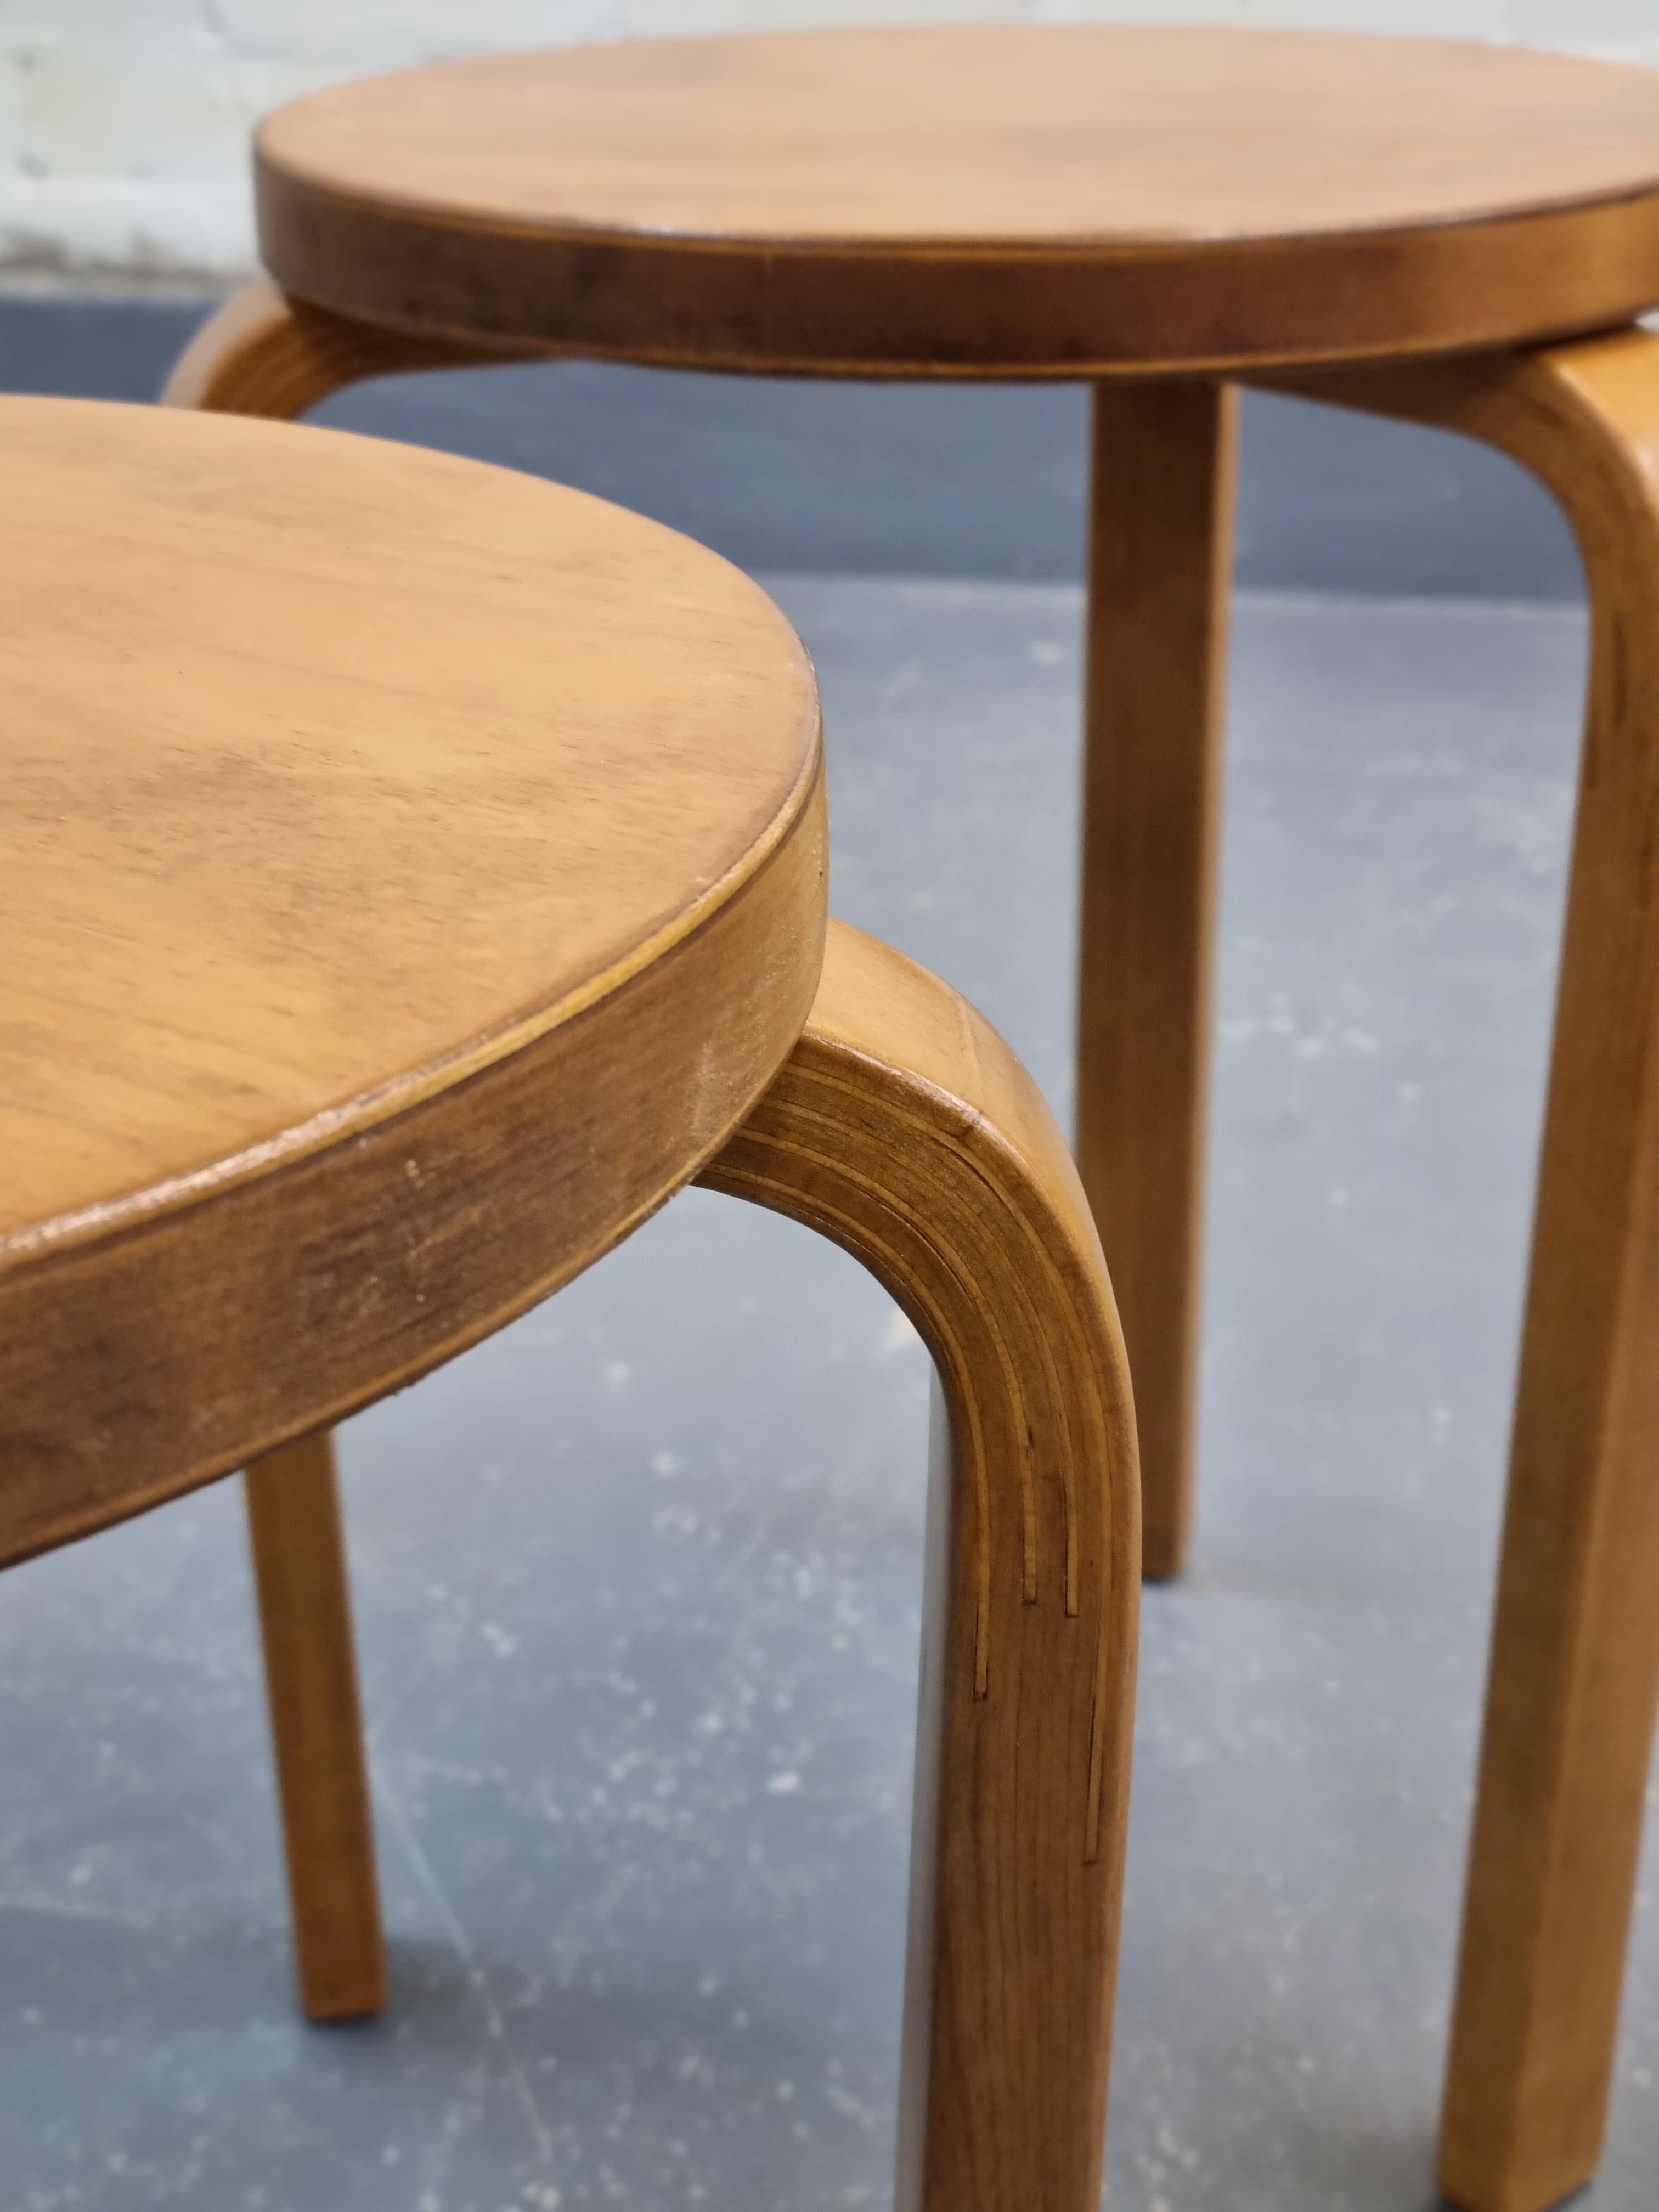 Mid-20th Century Alvar Aalto, Set of Commissioned Stools by Artek, 1950s For Sale